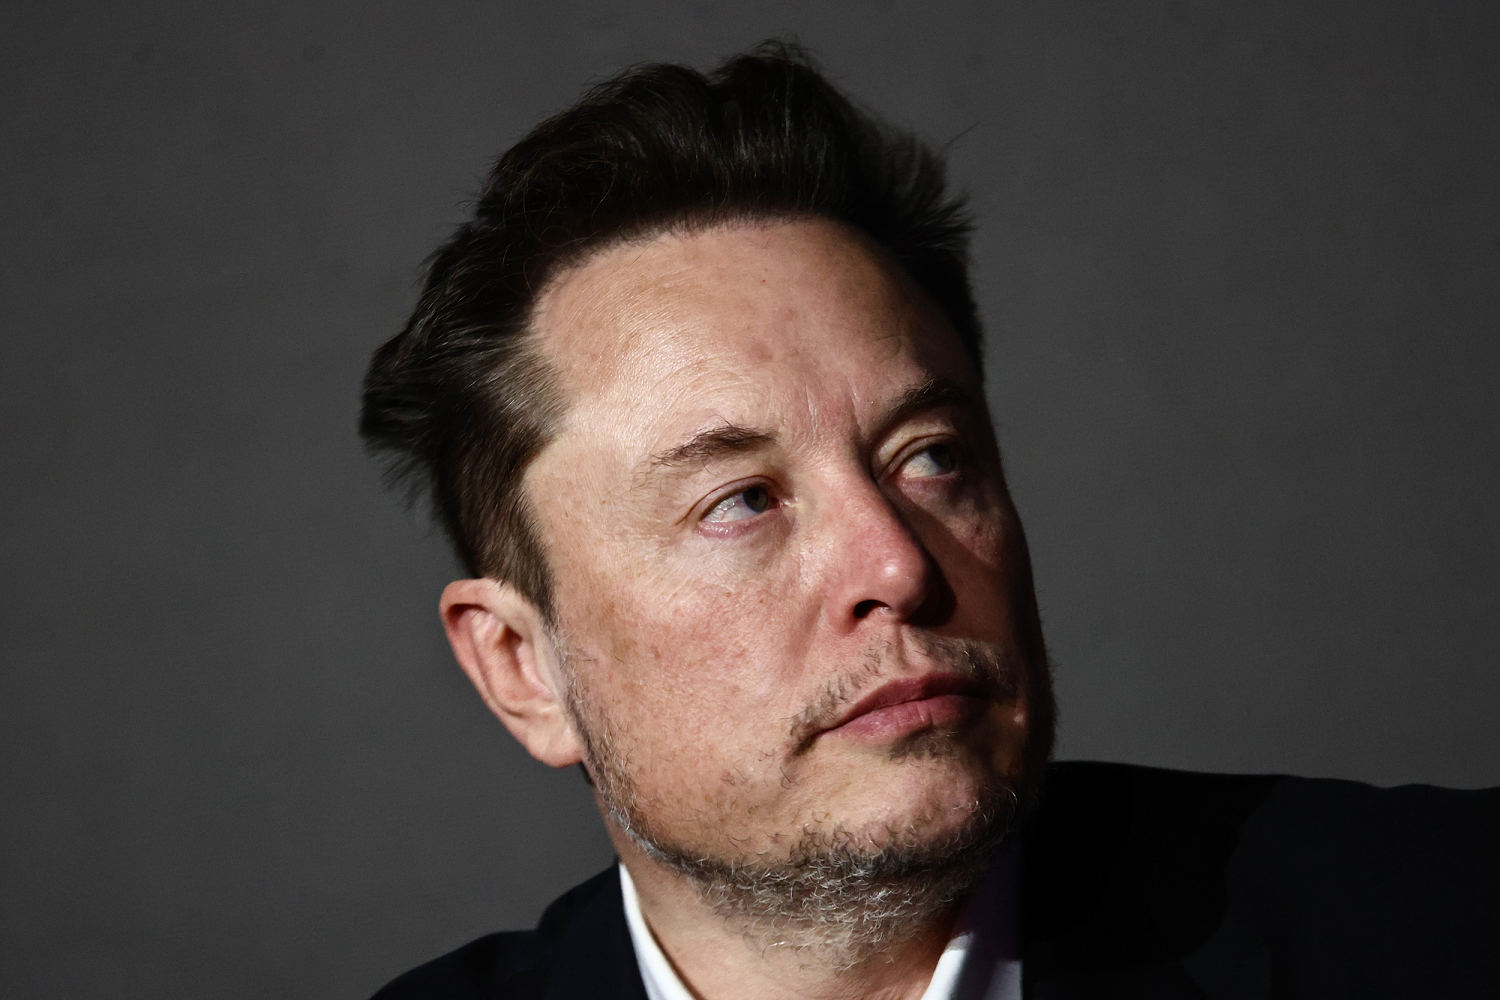 Elon Musk can't stop fearmongering on immigration